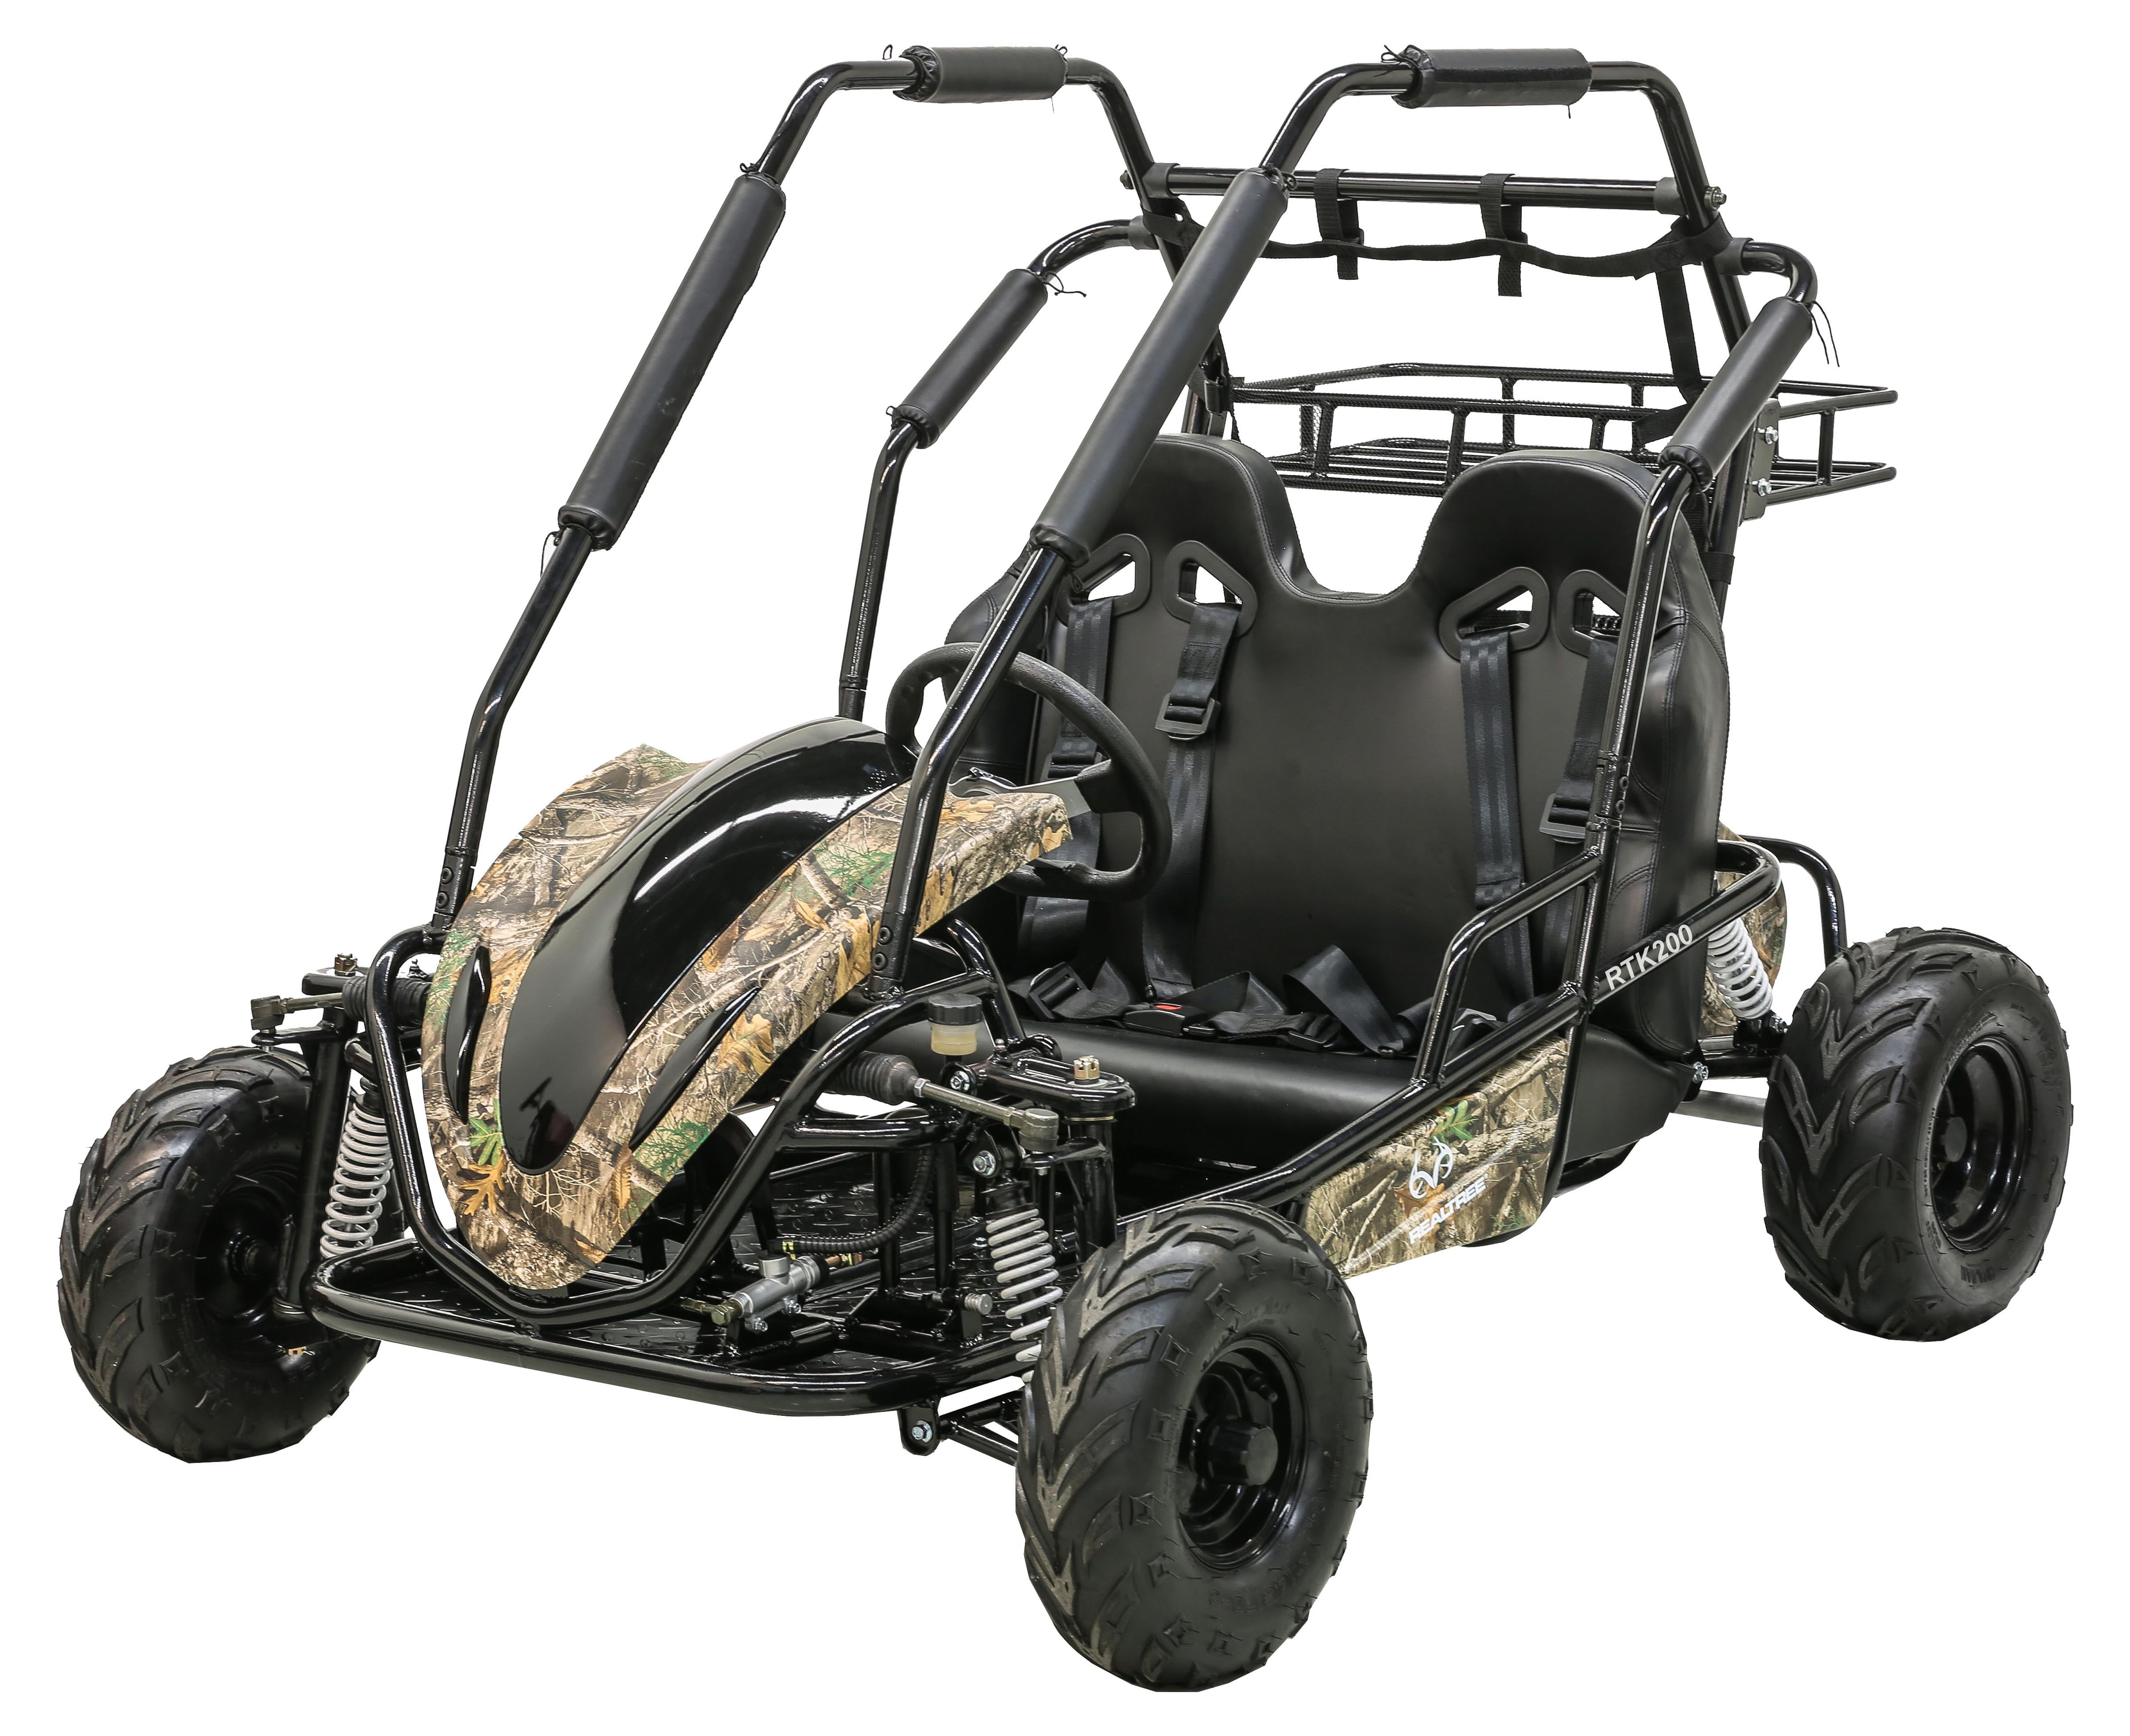 Realtree RTK196 Gas Powered 196cc Camo Power Ride-On Go Cart - image 1 of 3